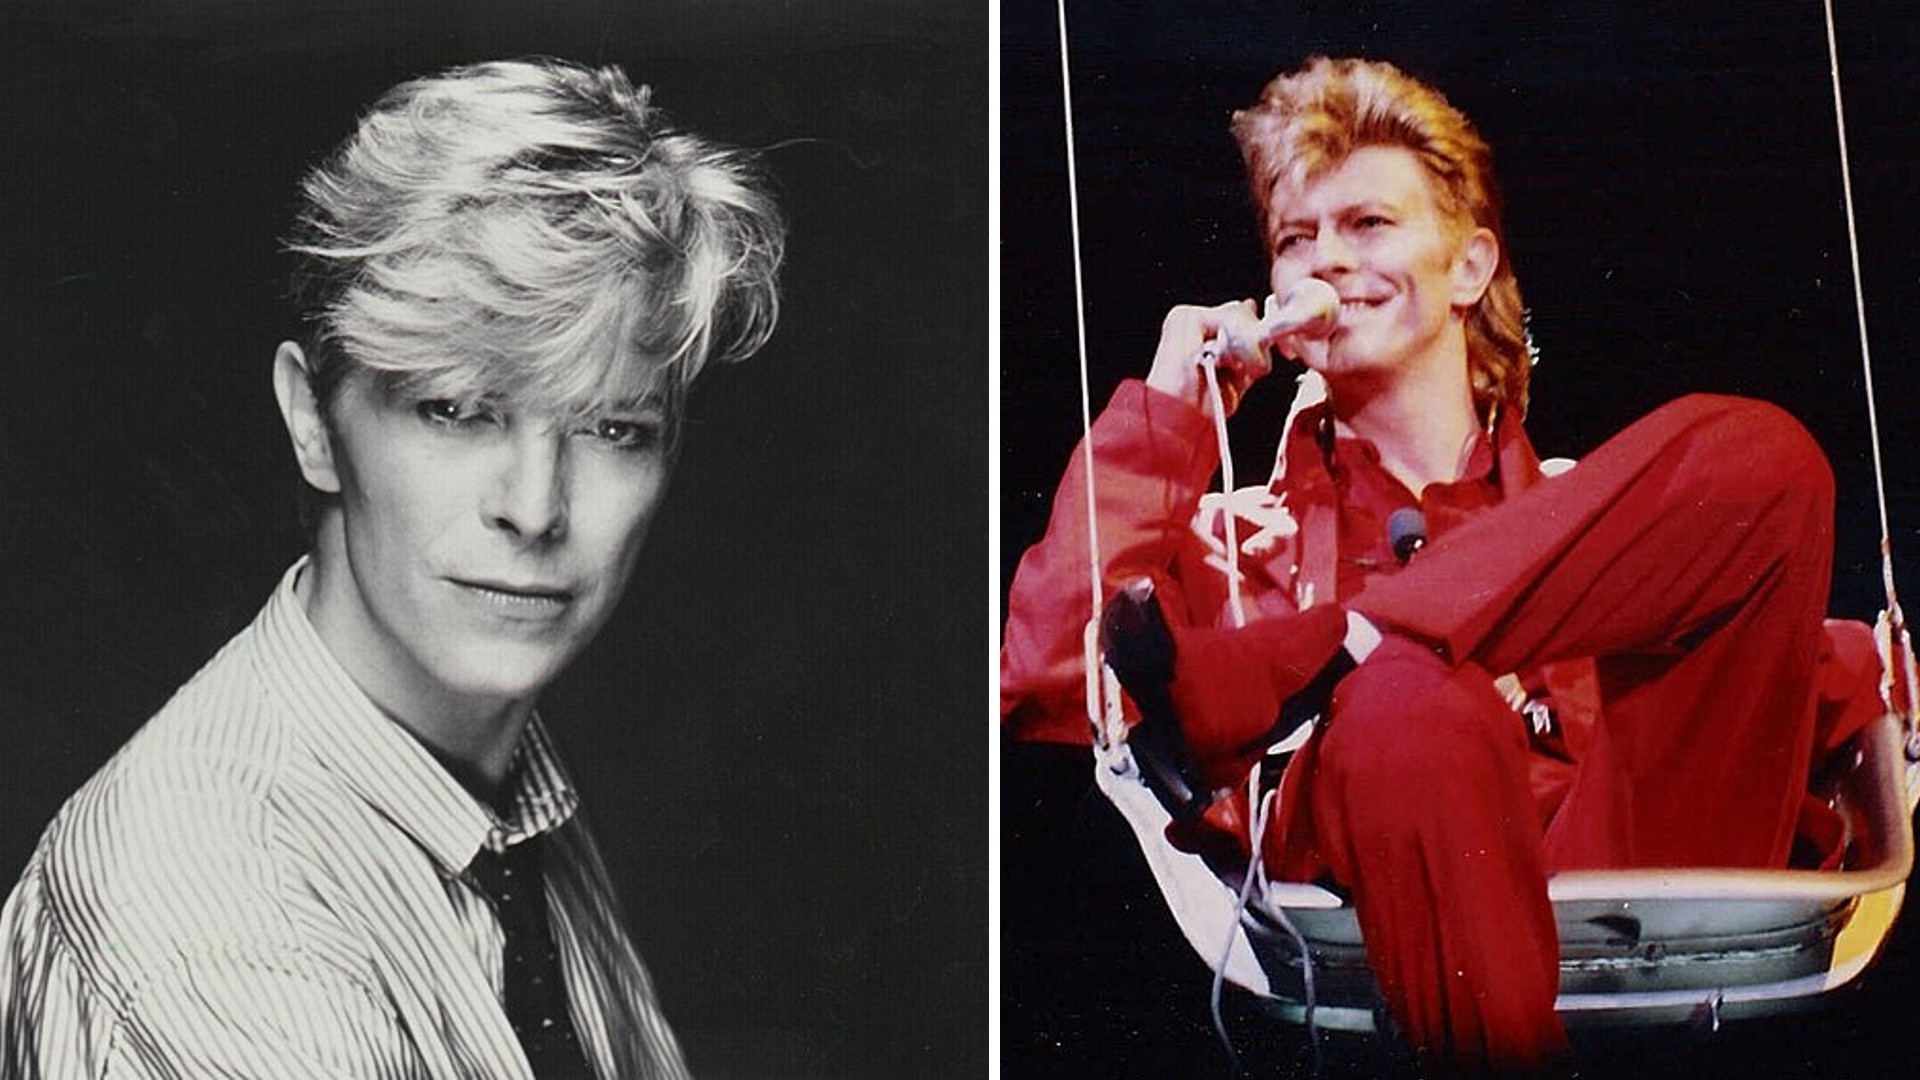 Split image: On the left, a black-and-white portrait of a person with light hair wearing a striped shirt and tie, looking at the camera. On the right, the same person in a red outfit performing on stage, sitting in a swing and holding a microphone.